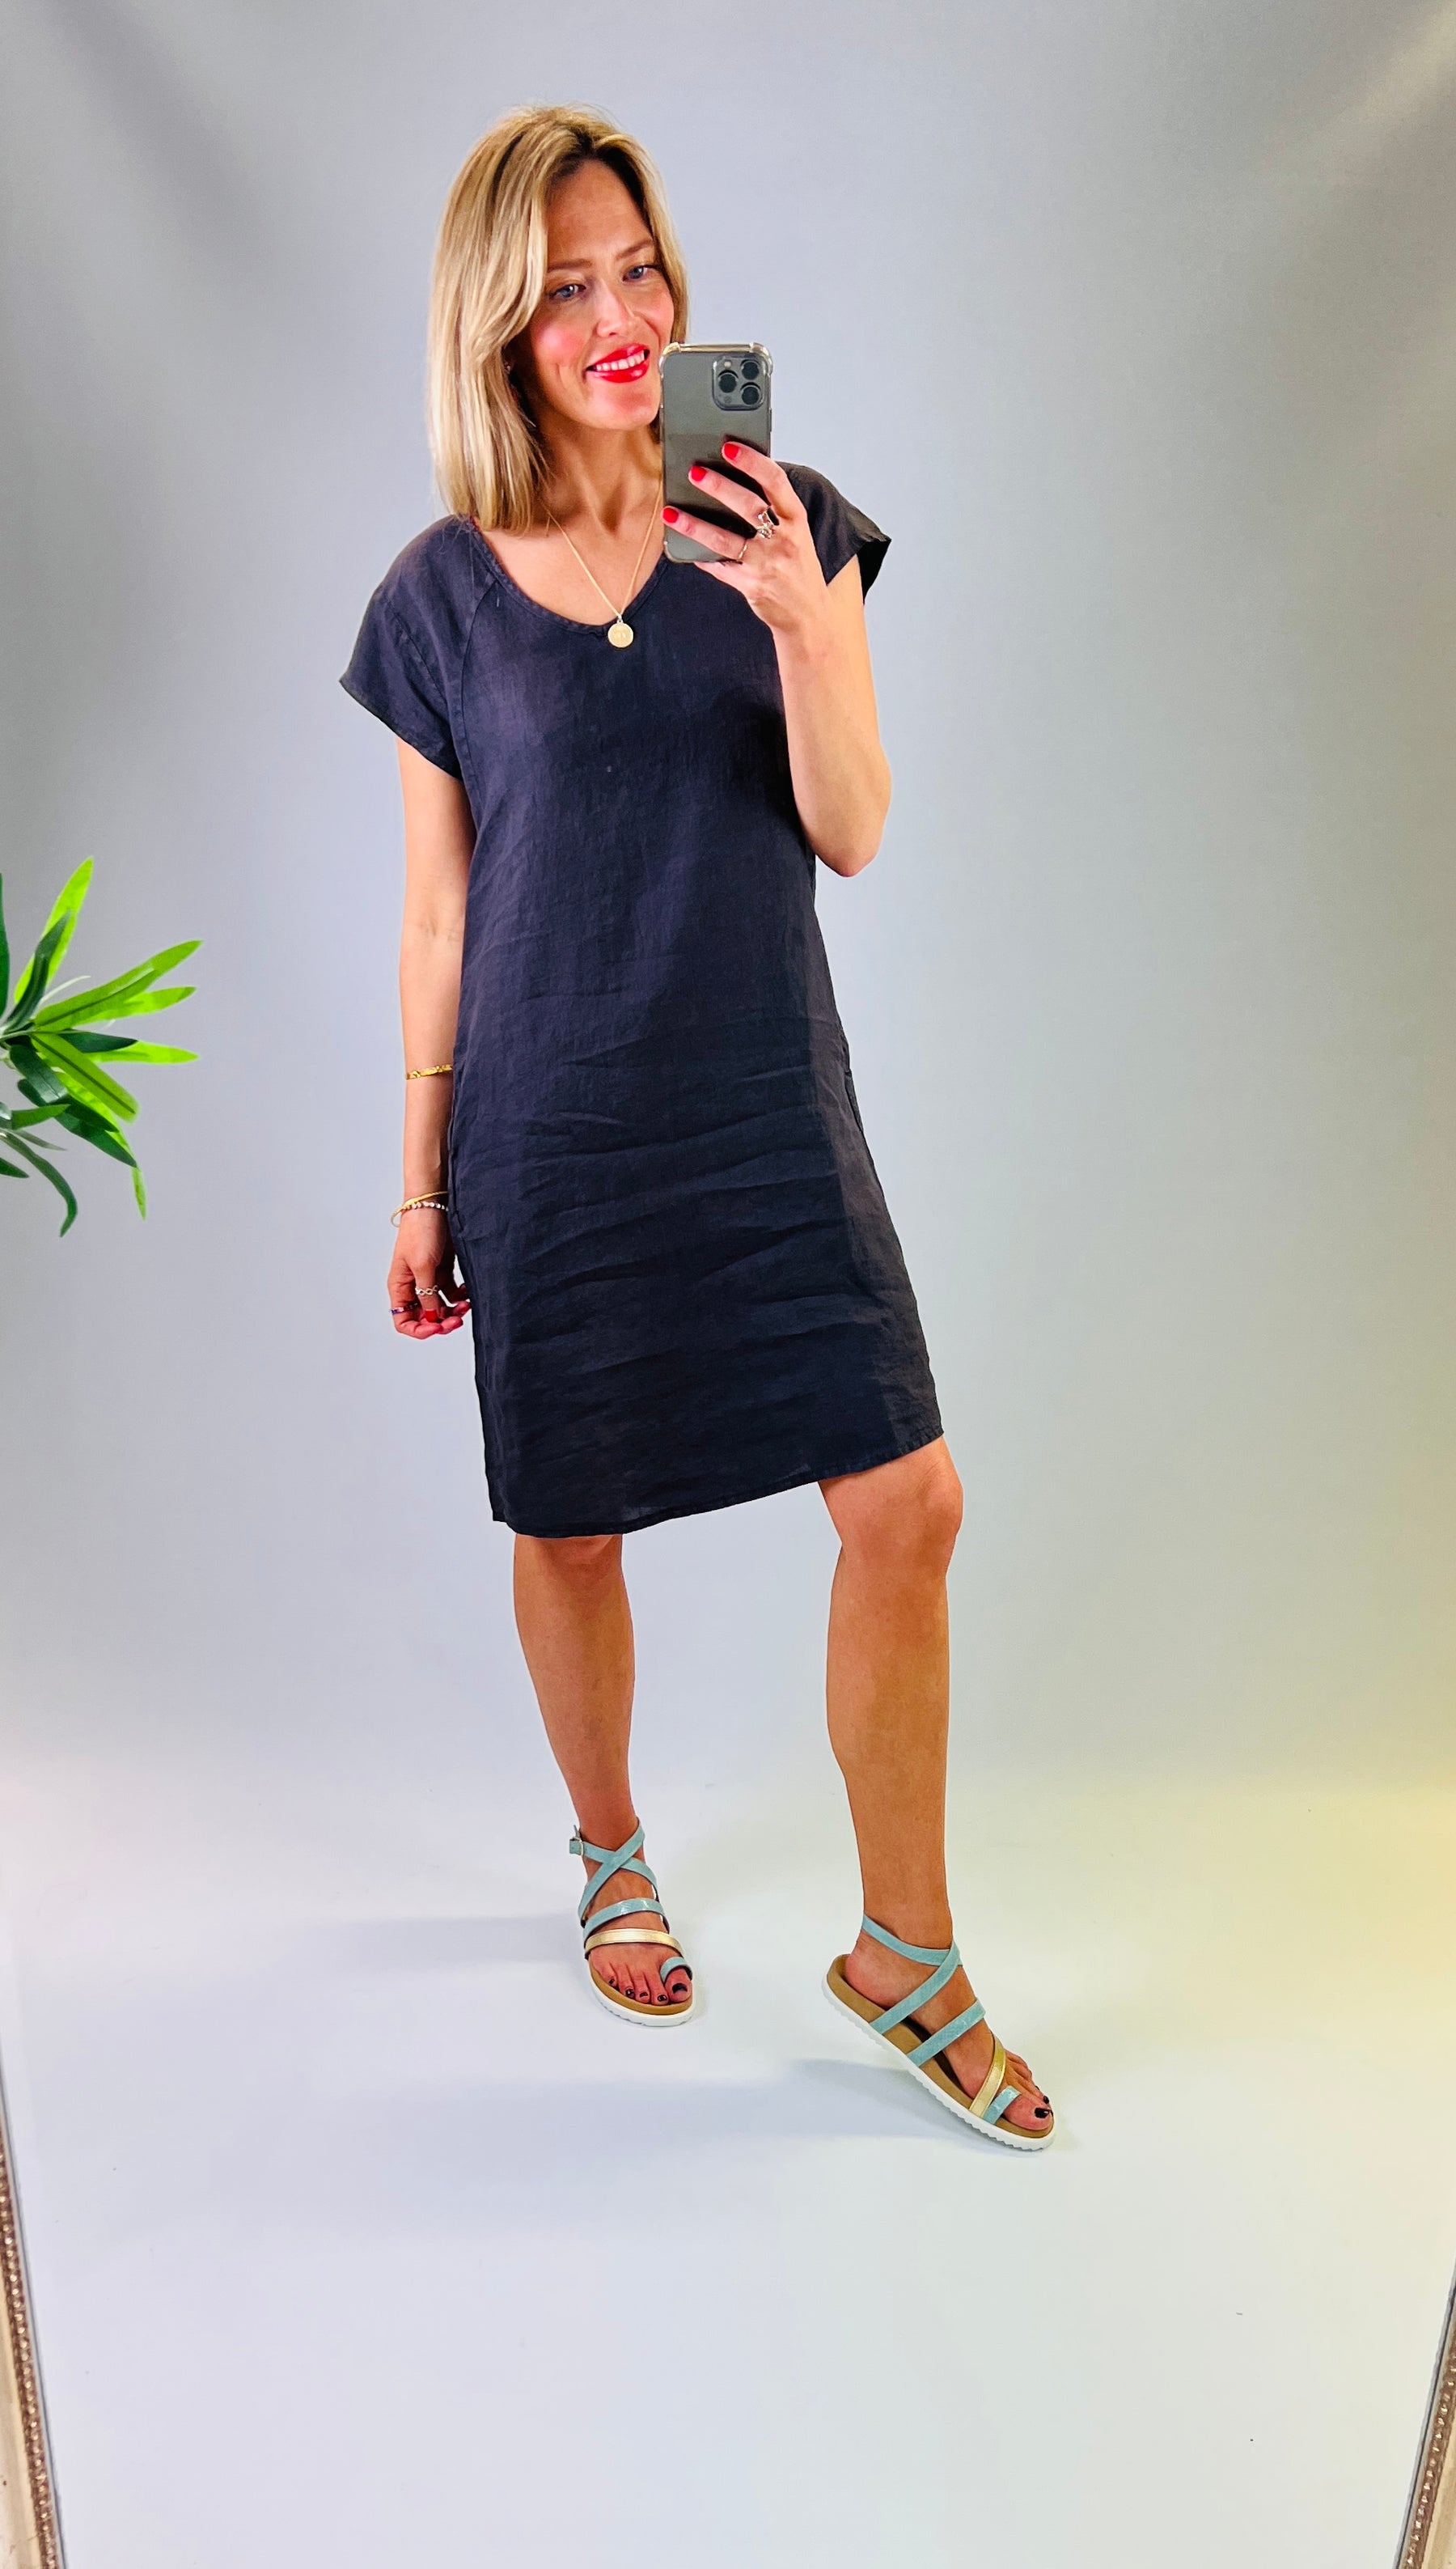 Classic linen slip-on dress, with stretch cotton back detail and pockets.